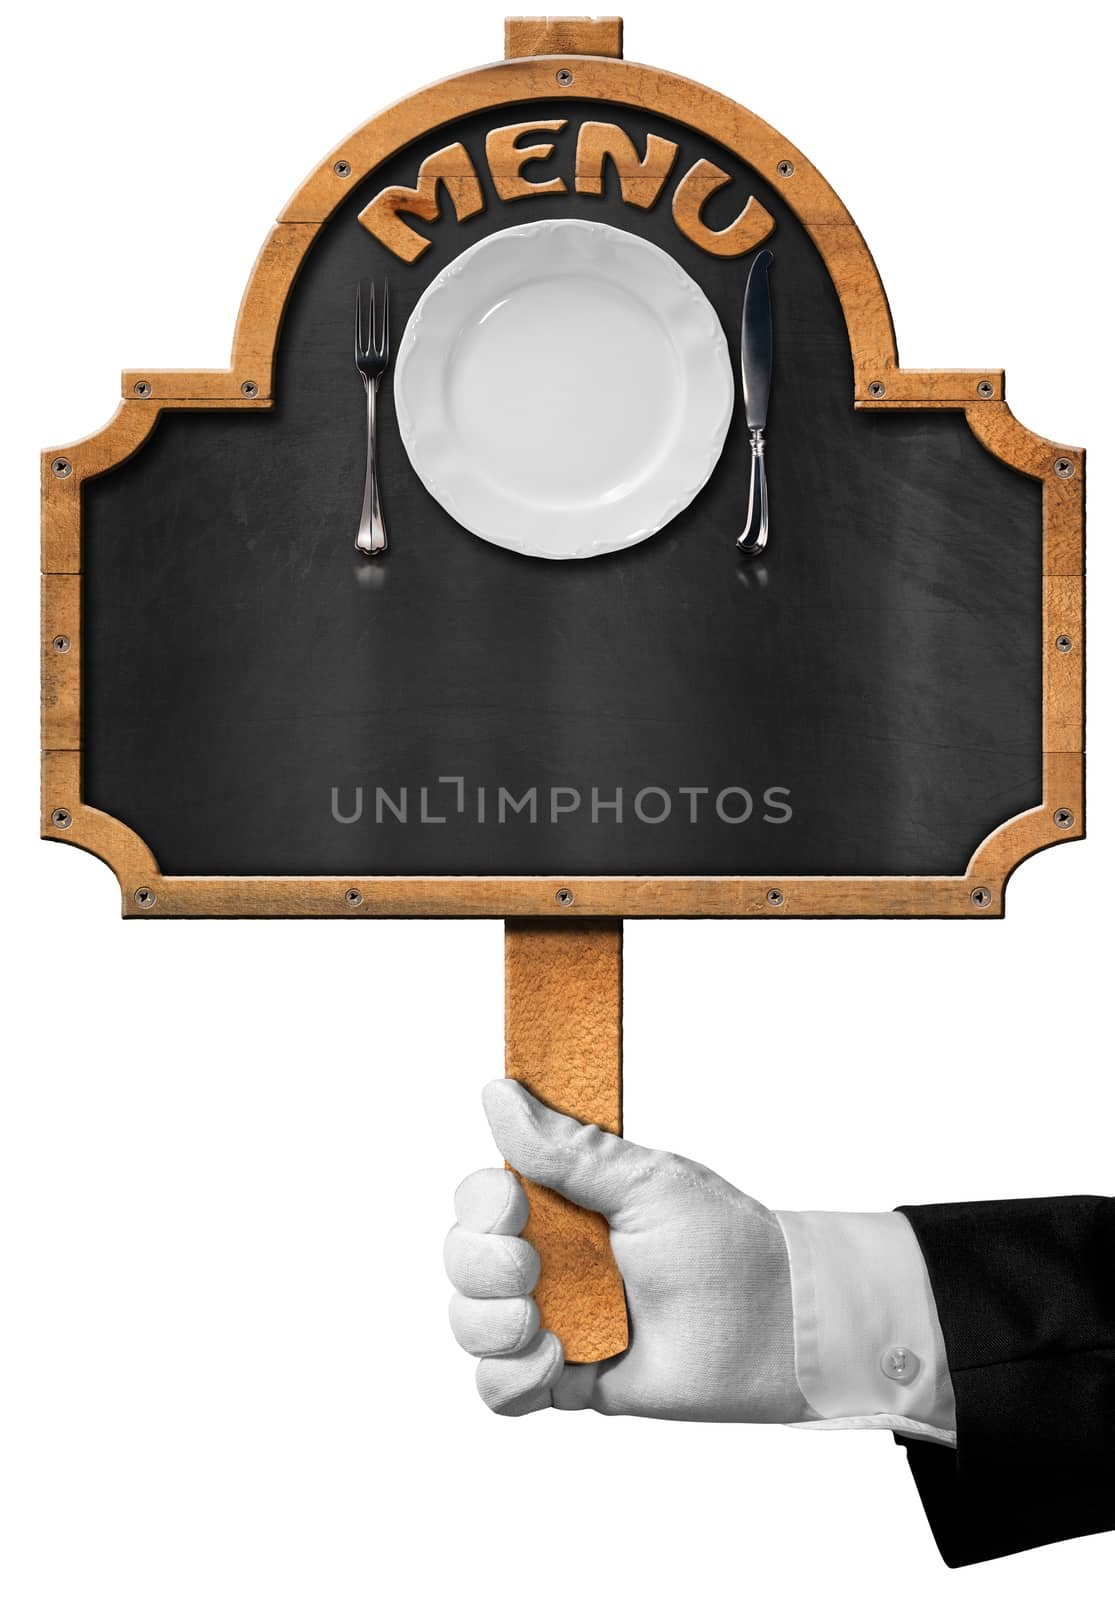 Hand of waiter with white glove holding a pole with empty blackboard, white plate with silver cutlery and text menu. Isolated on a white background